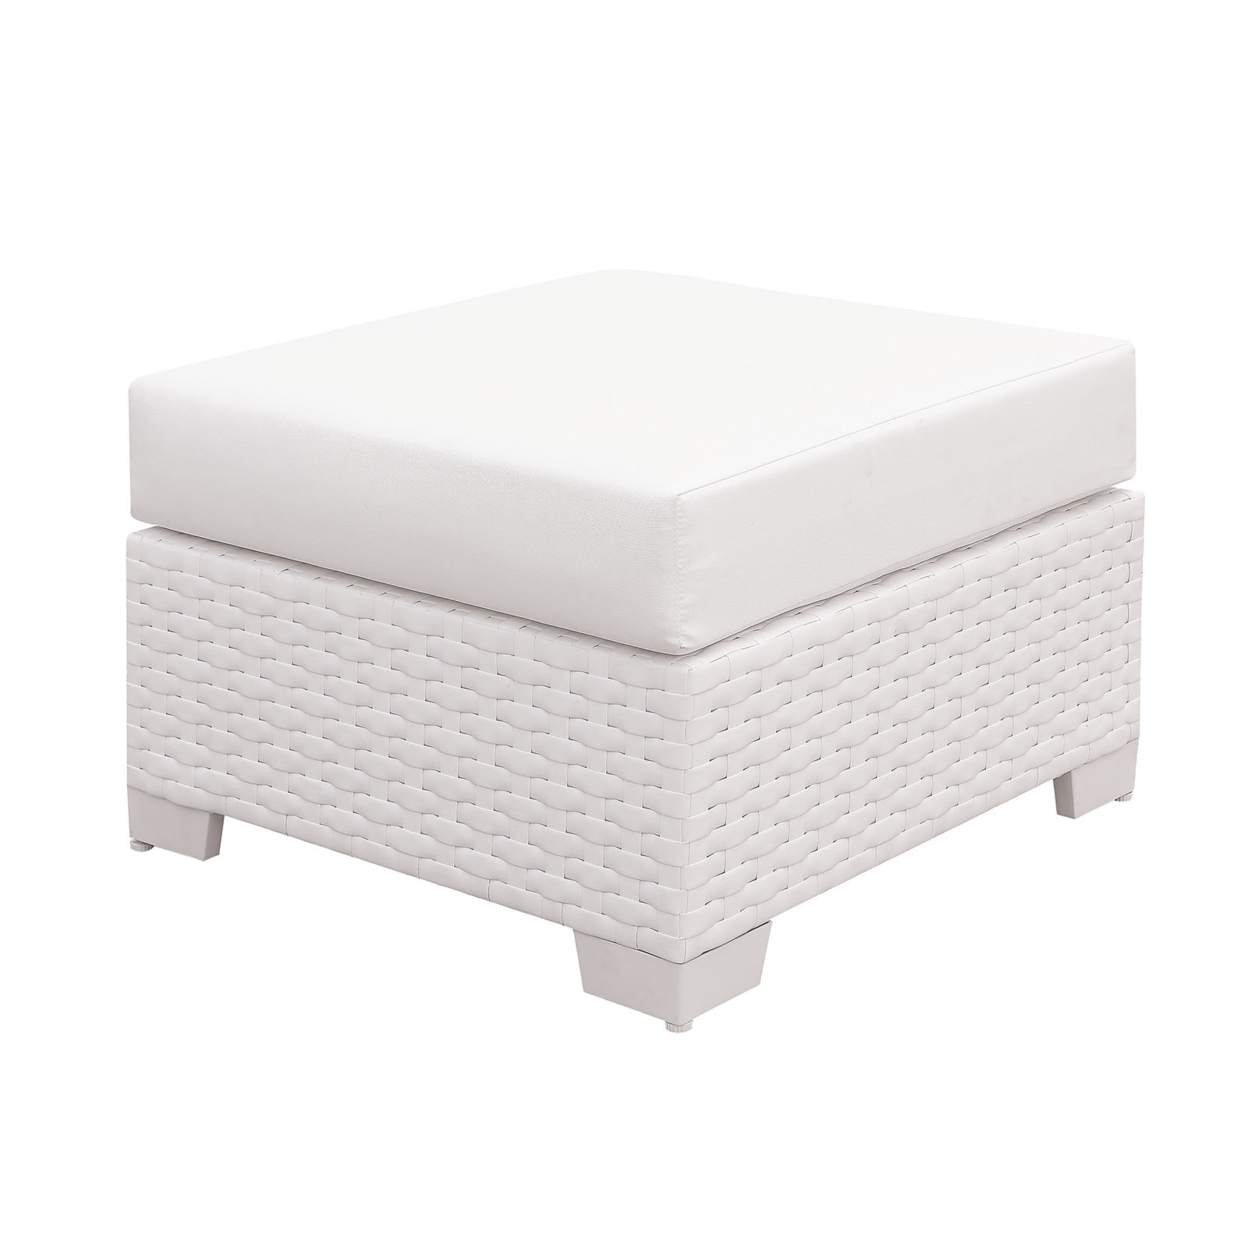 25 Inch Ottoman With Faux Polyester Padded Seat Cushion, White Wicker